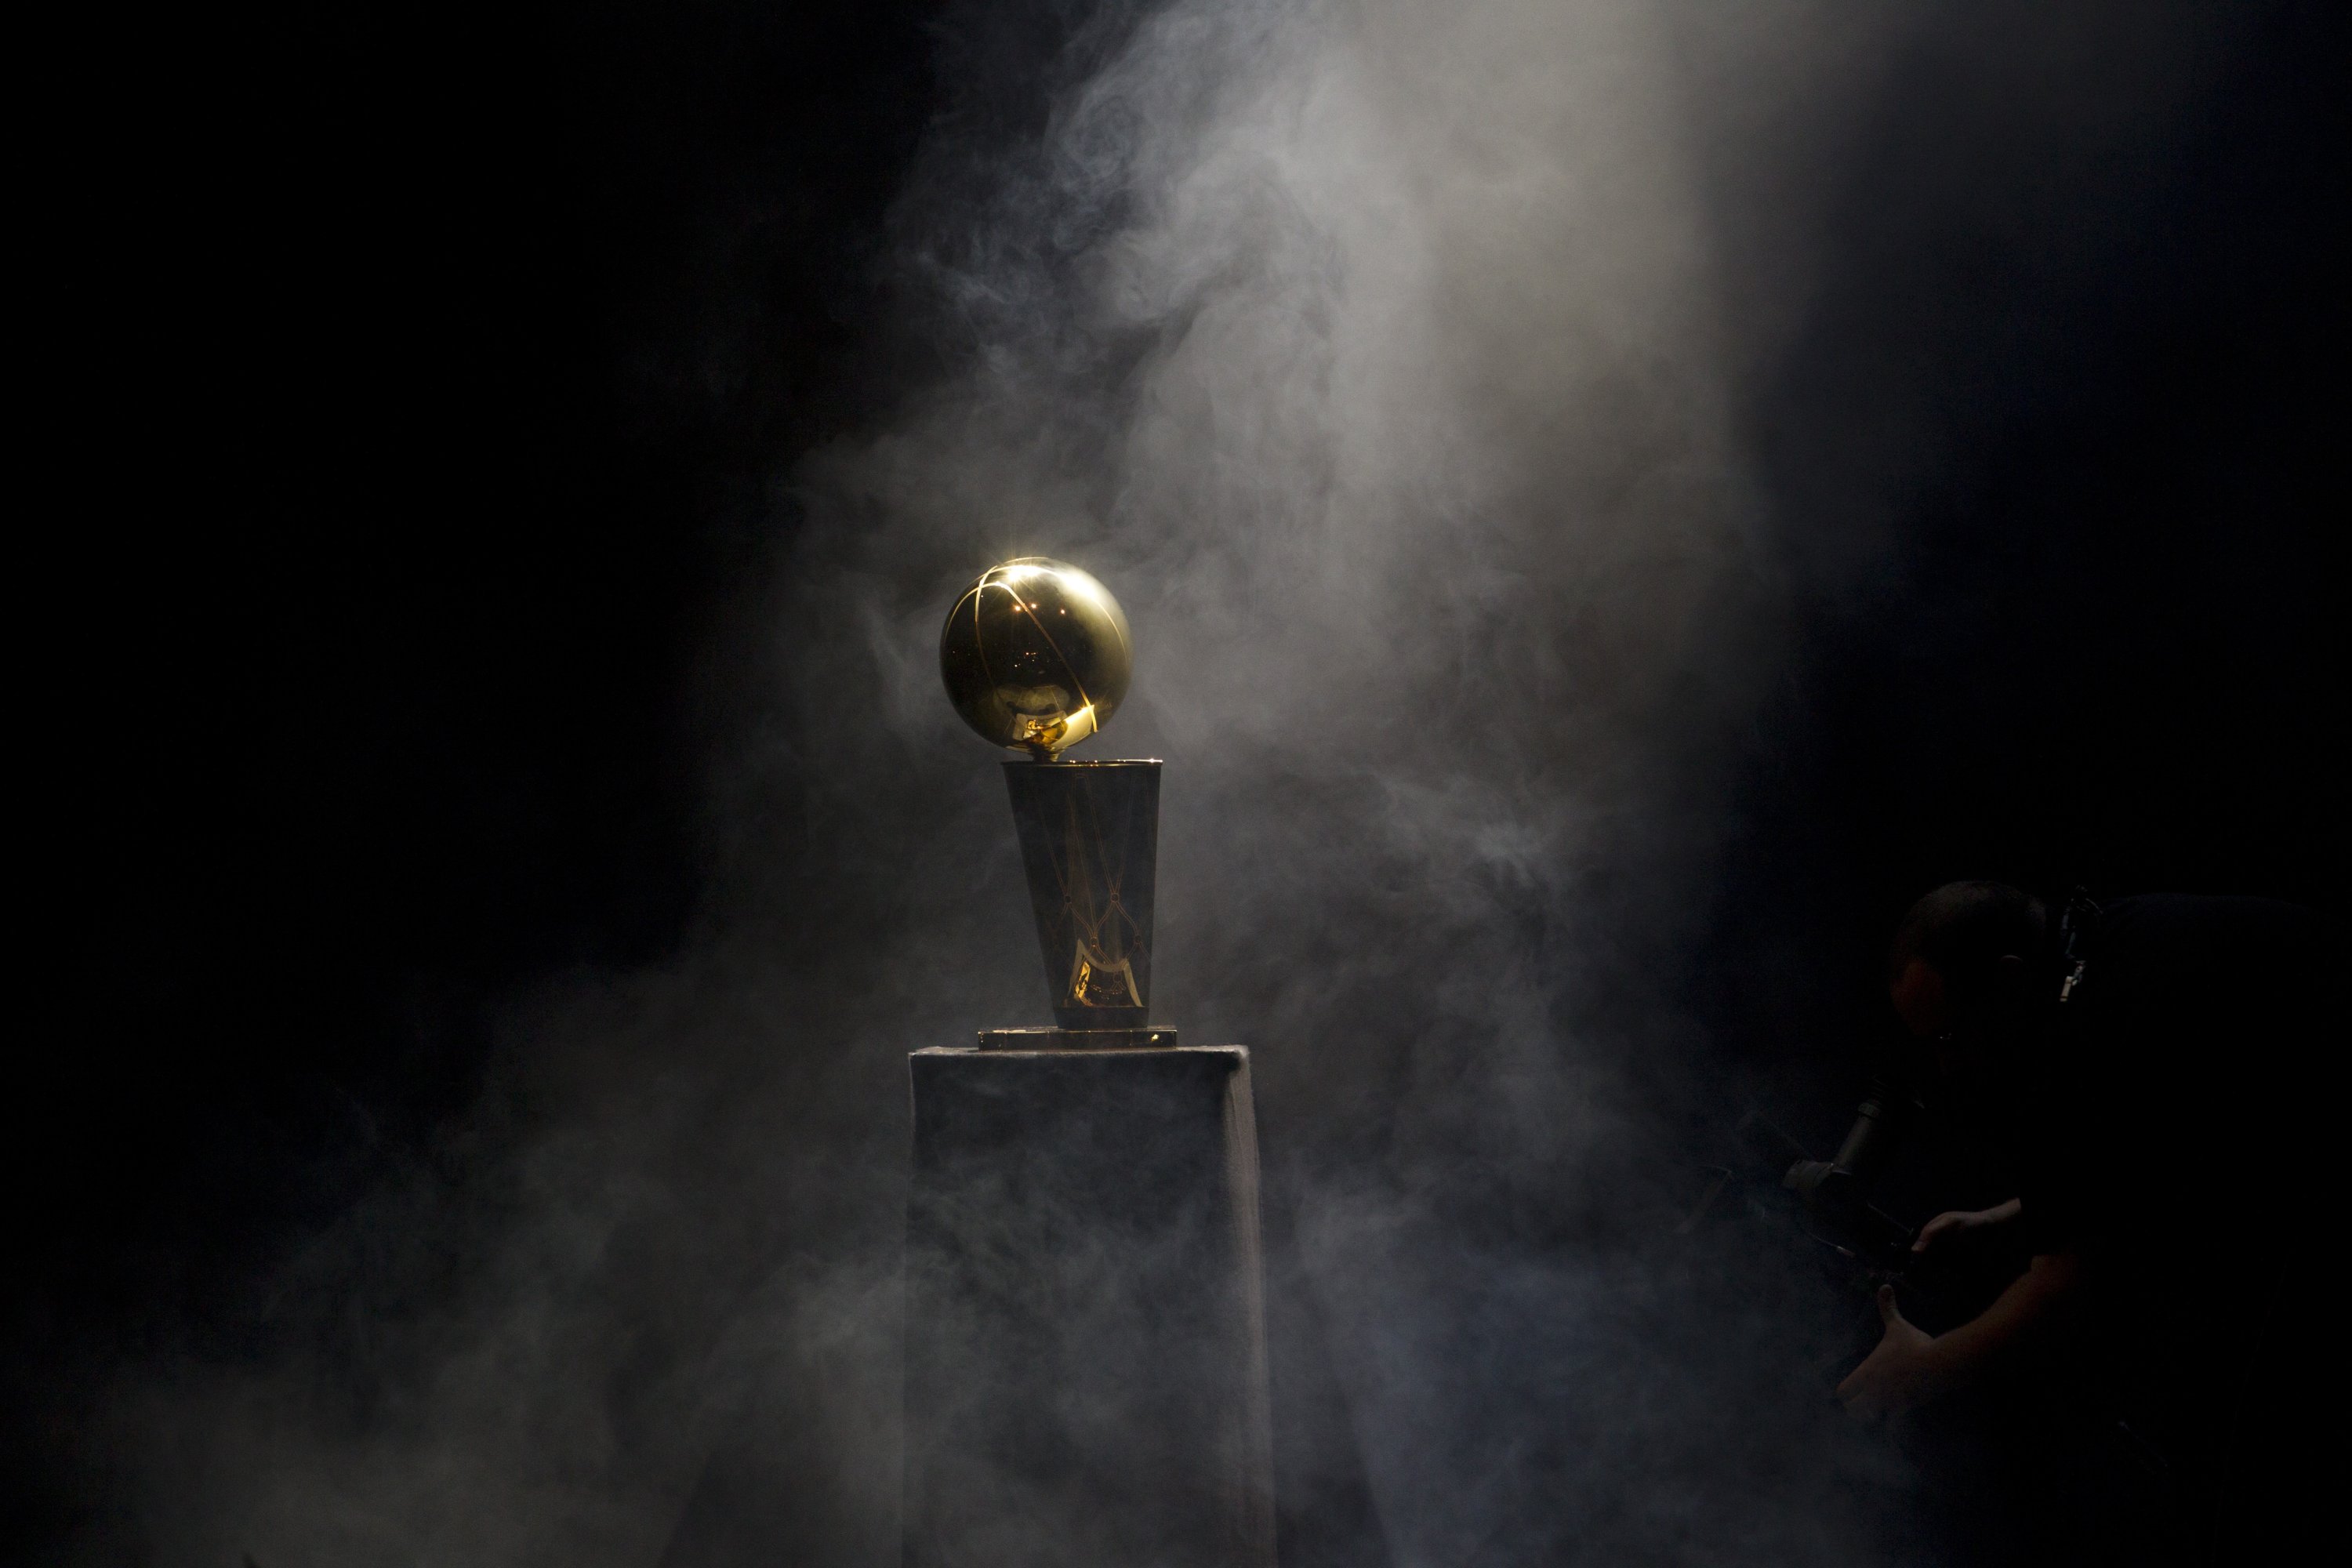 Change coming to NBA: What to prophesy on the league's 100th year